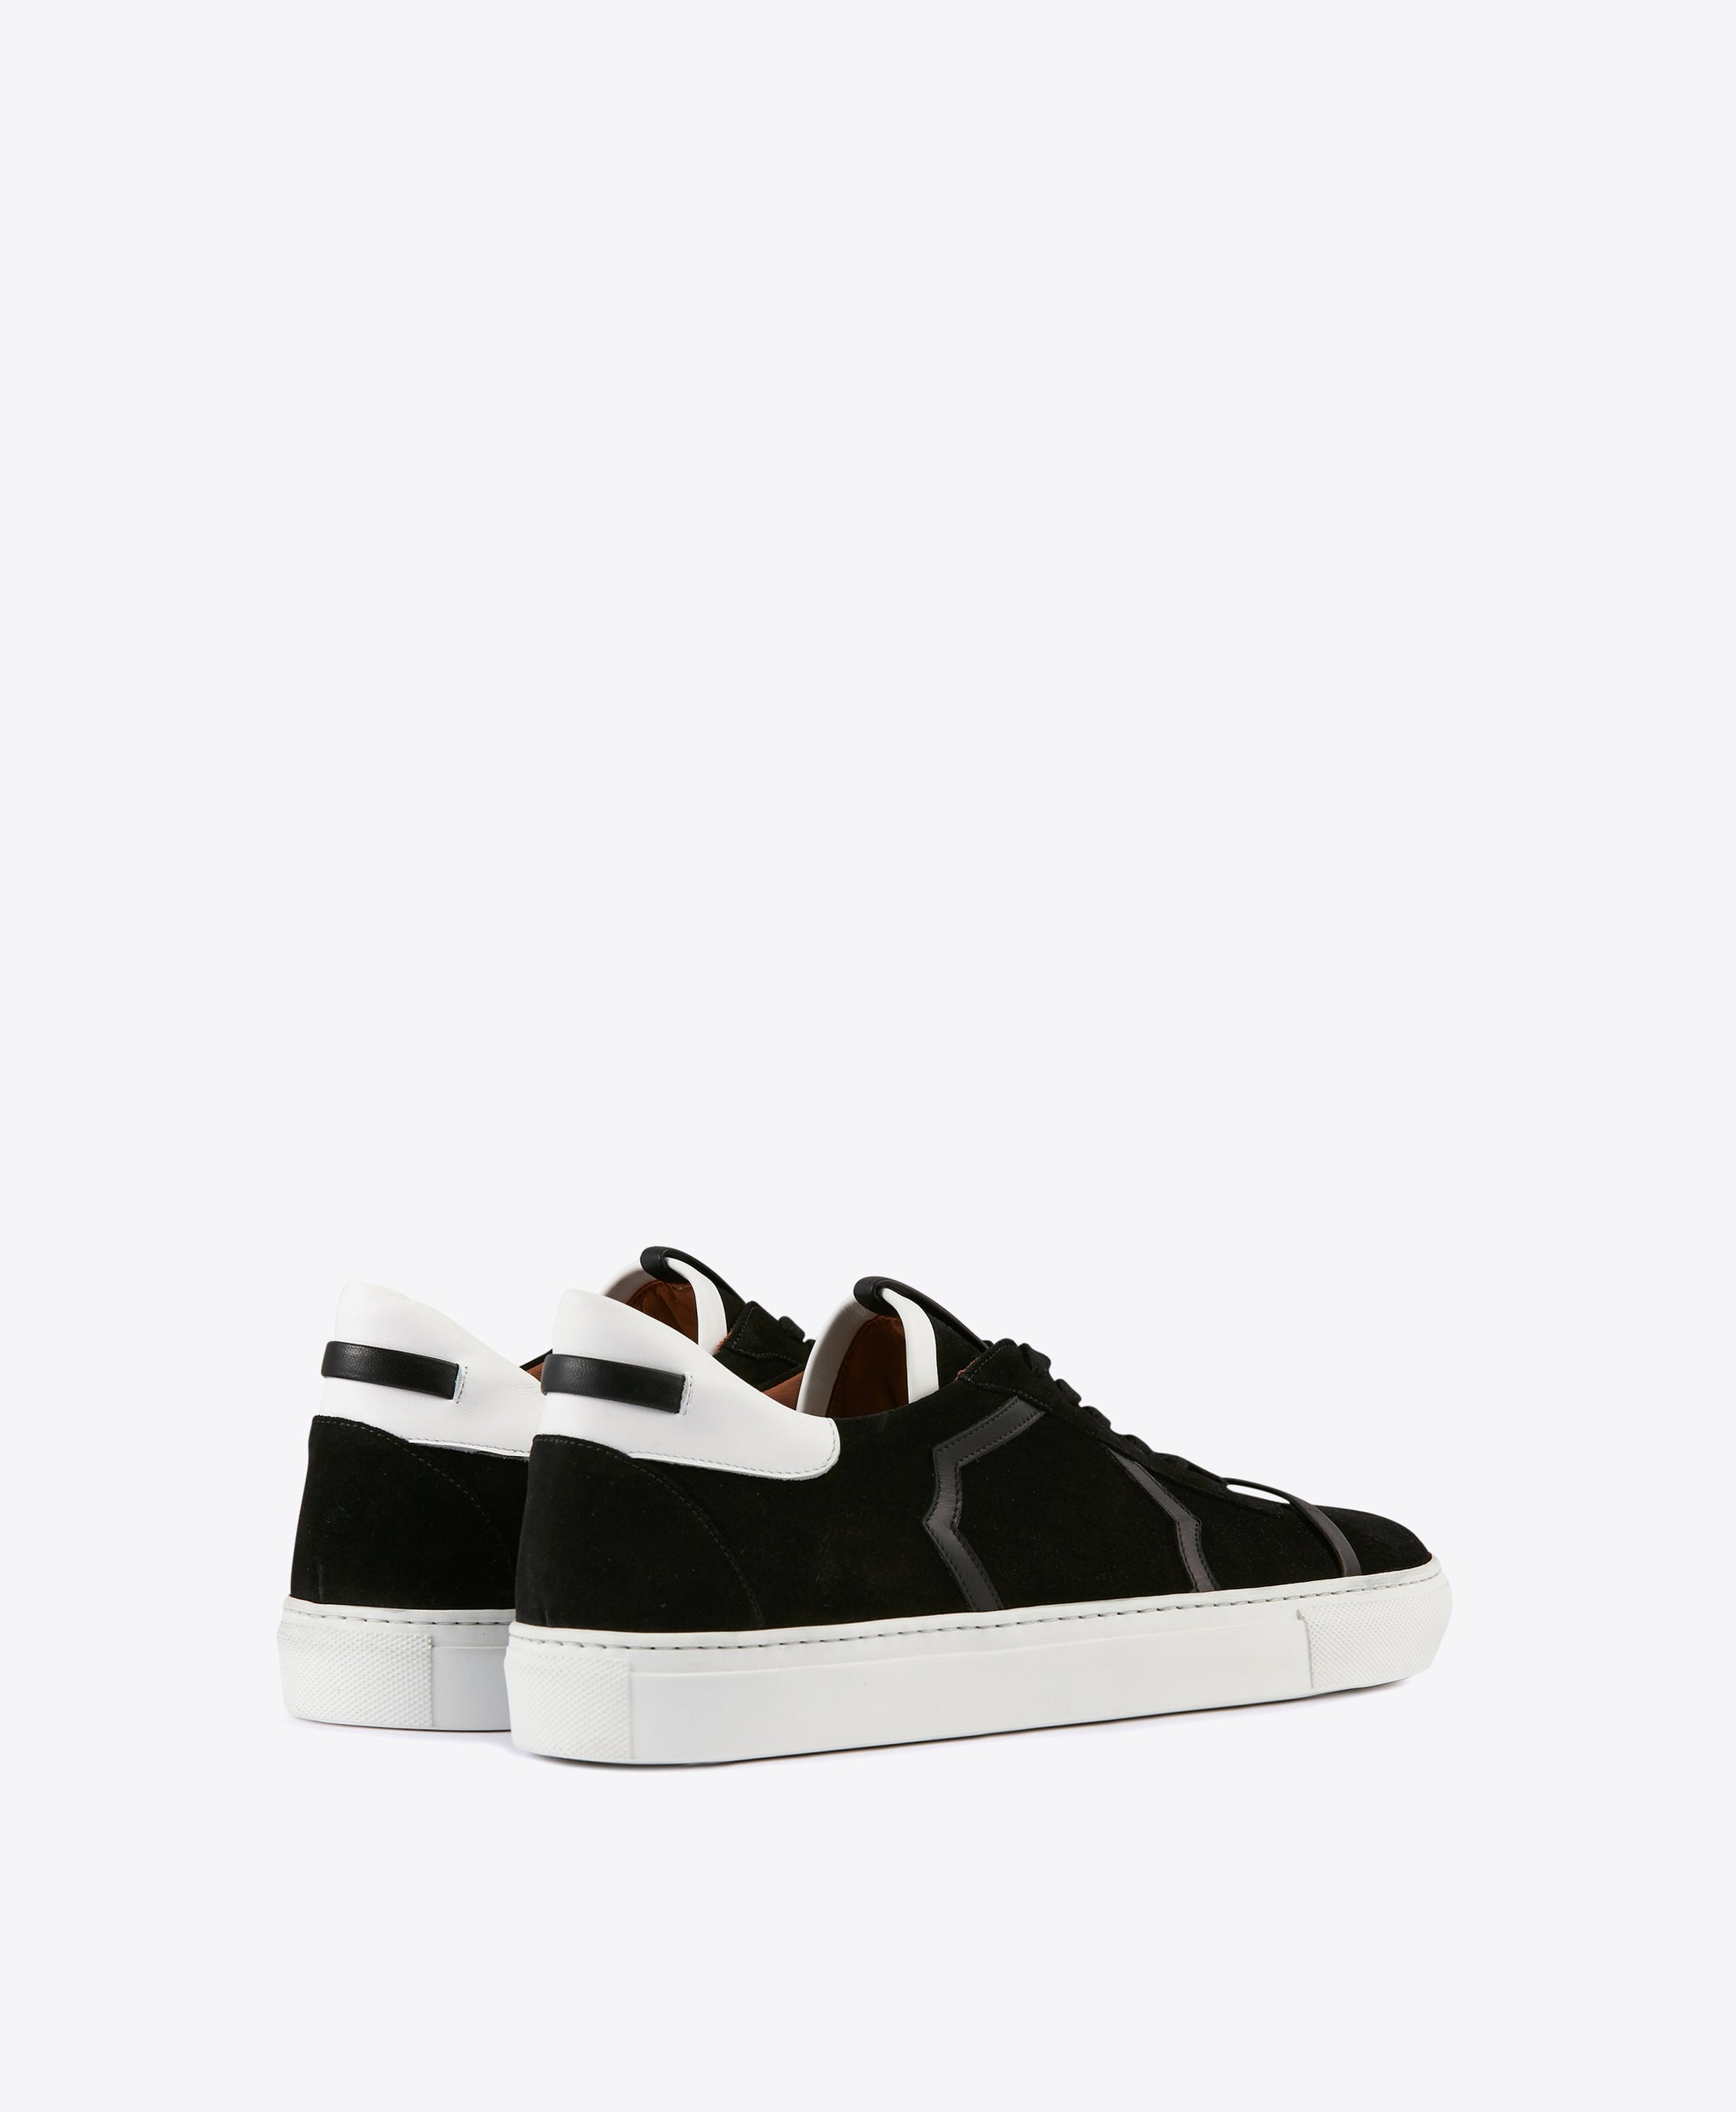 Men's Black and Suede Sneakers Malone Souliers